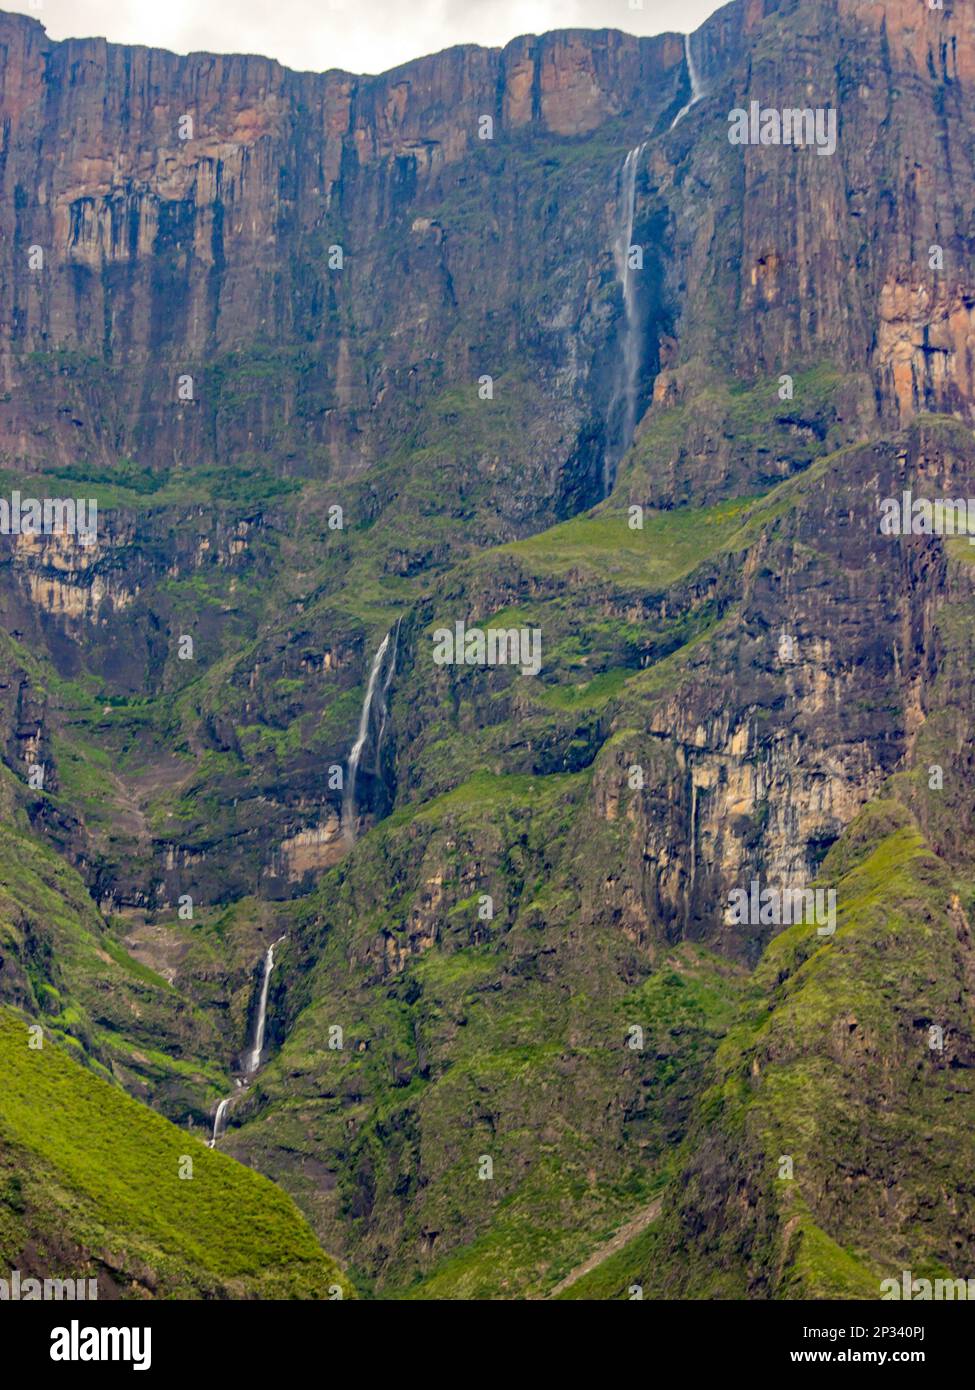 Distant view of Majestic Tugela Falls, plummeting down the sheer basalt cliffs of the Amphitheater in the Drakensberg Mountains of South Africa Stock Photo